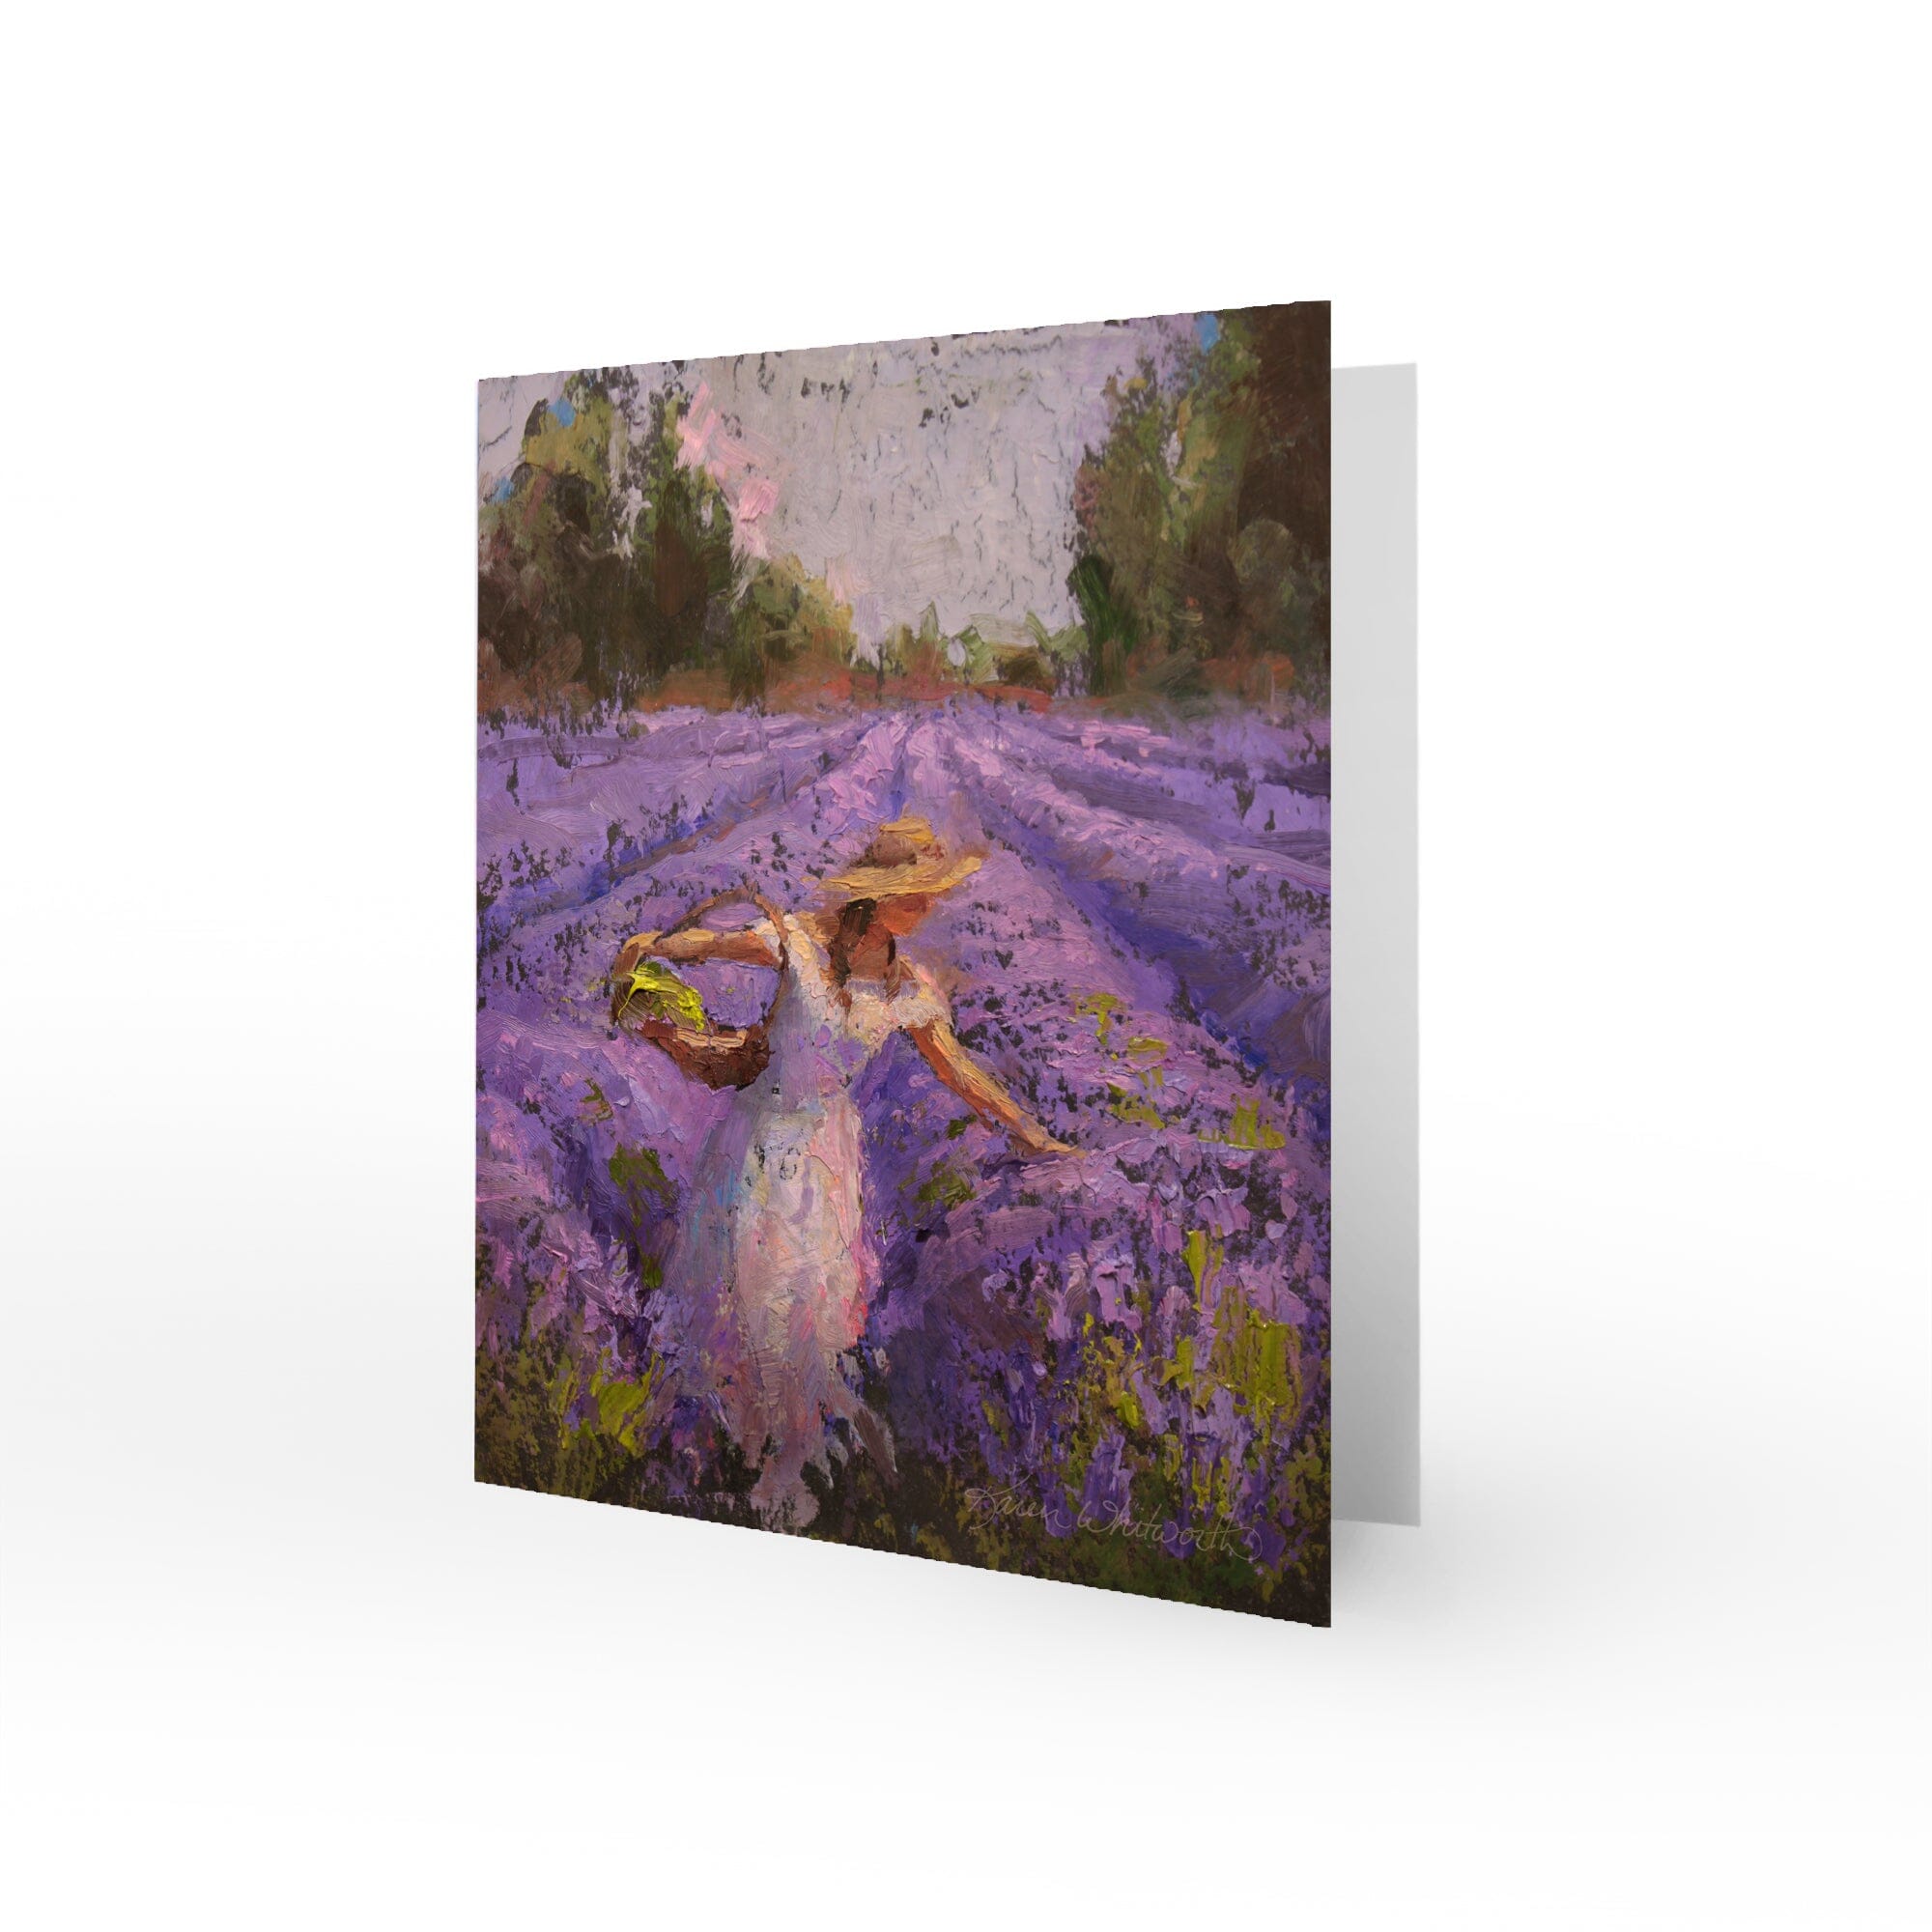 Lavender greeting card with painting of woman harvesting purple flowers in a blooming lavender field. The image is a floral painting by landscape artist Karen Whitworth. The card has a blank inside and comes with a white envelope.